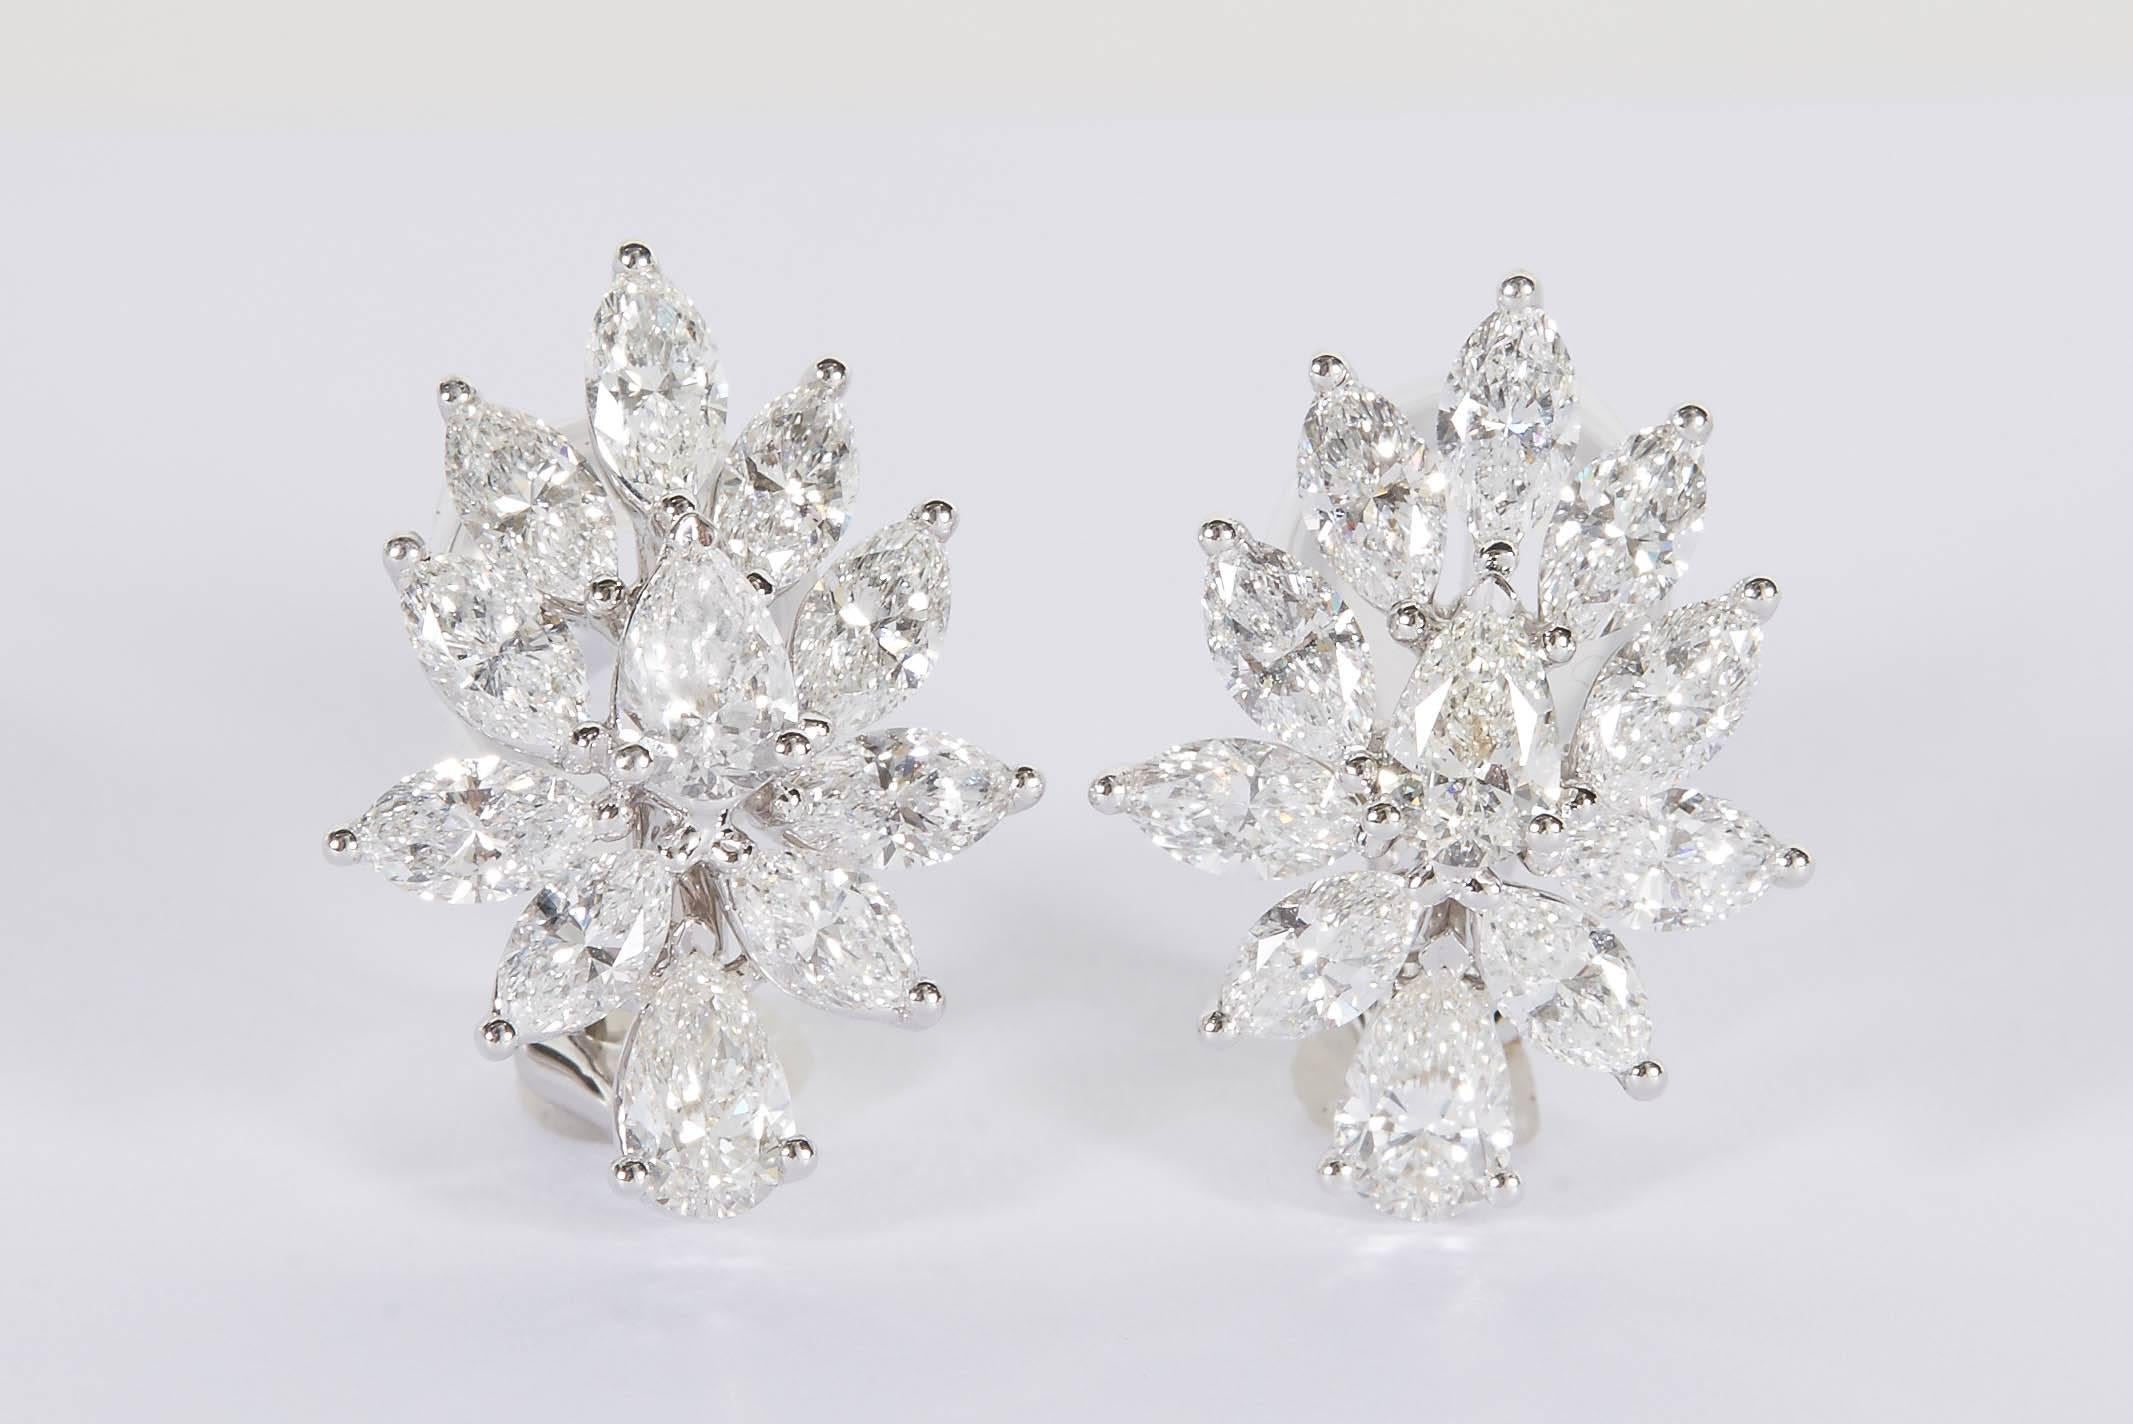 

A beautiful pair of timeless cluster earrings.

4.93 carats of beautiful white VS pear and marquise cut diamonds set in 18k white gold. 

Approximately .85 inches tall, just over half an inch at its widest points. 

A great earring to add to any